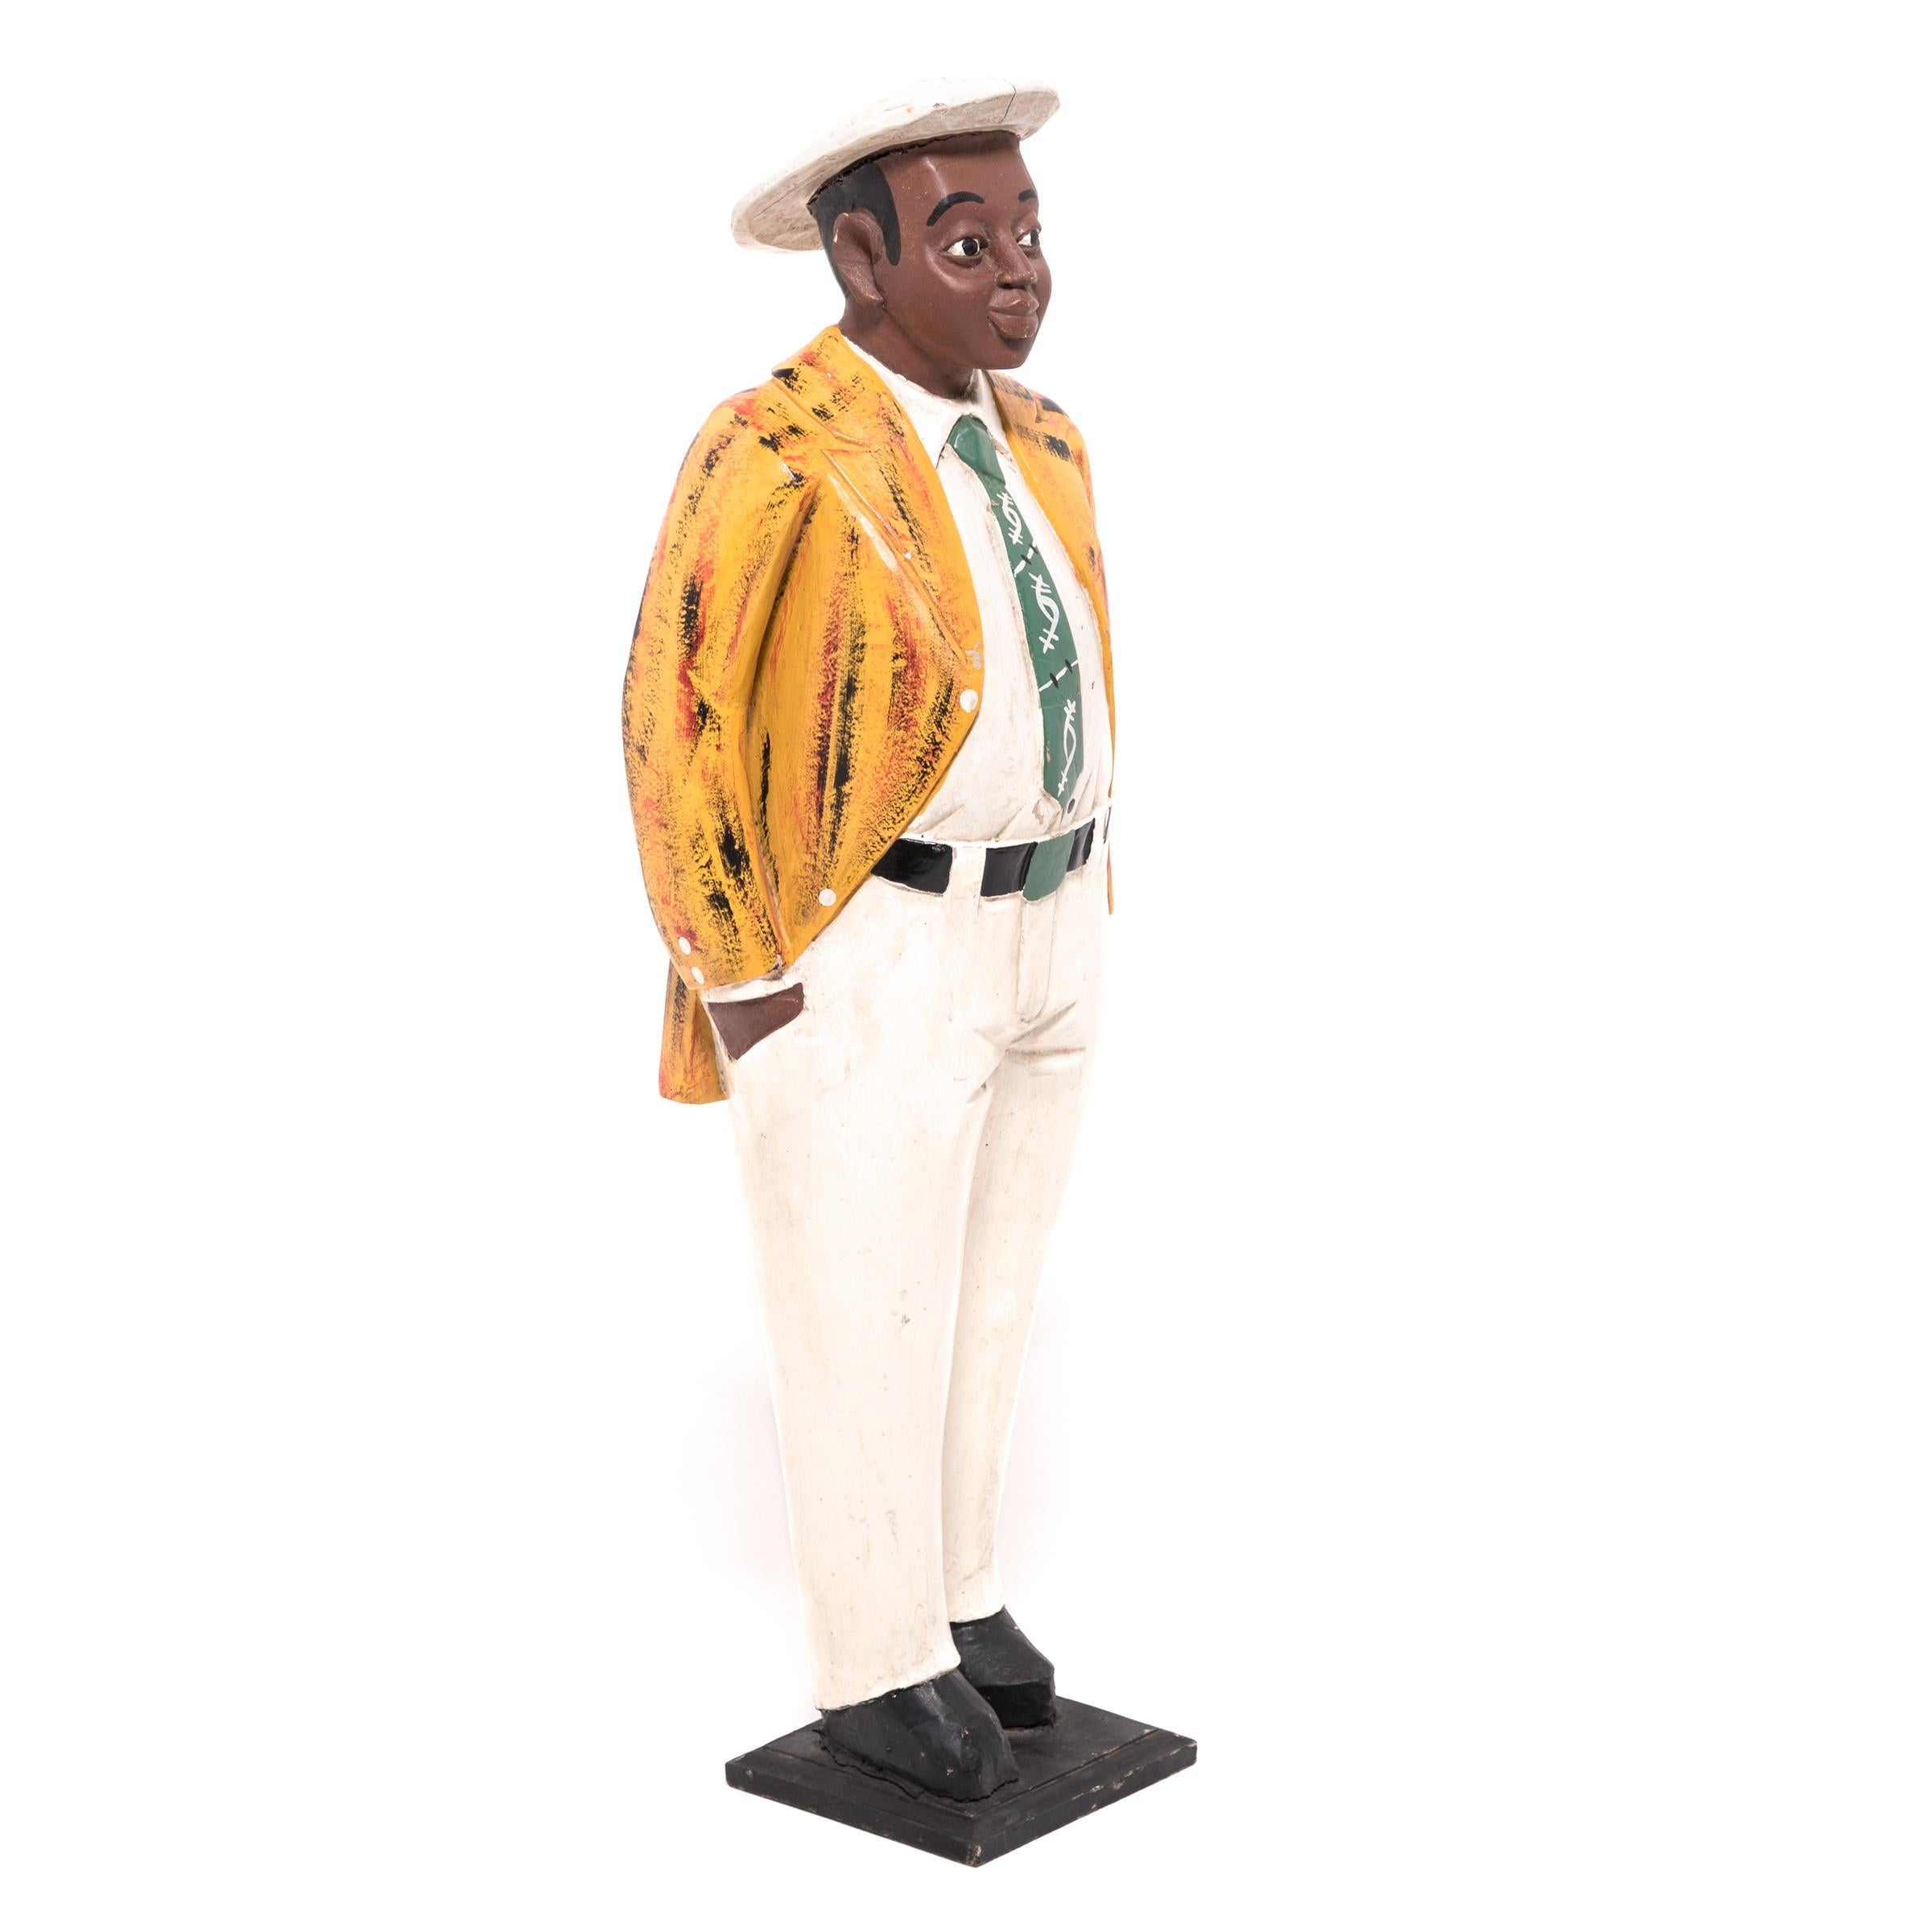 Carved African Colonial Figure with Yellow Jacket